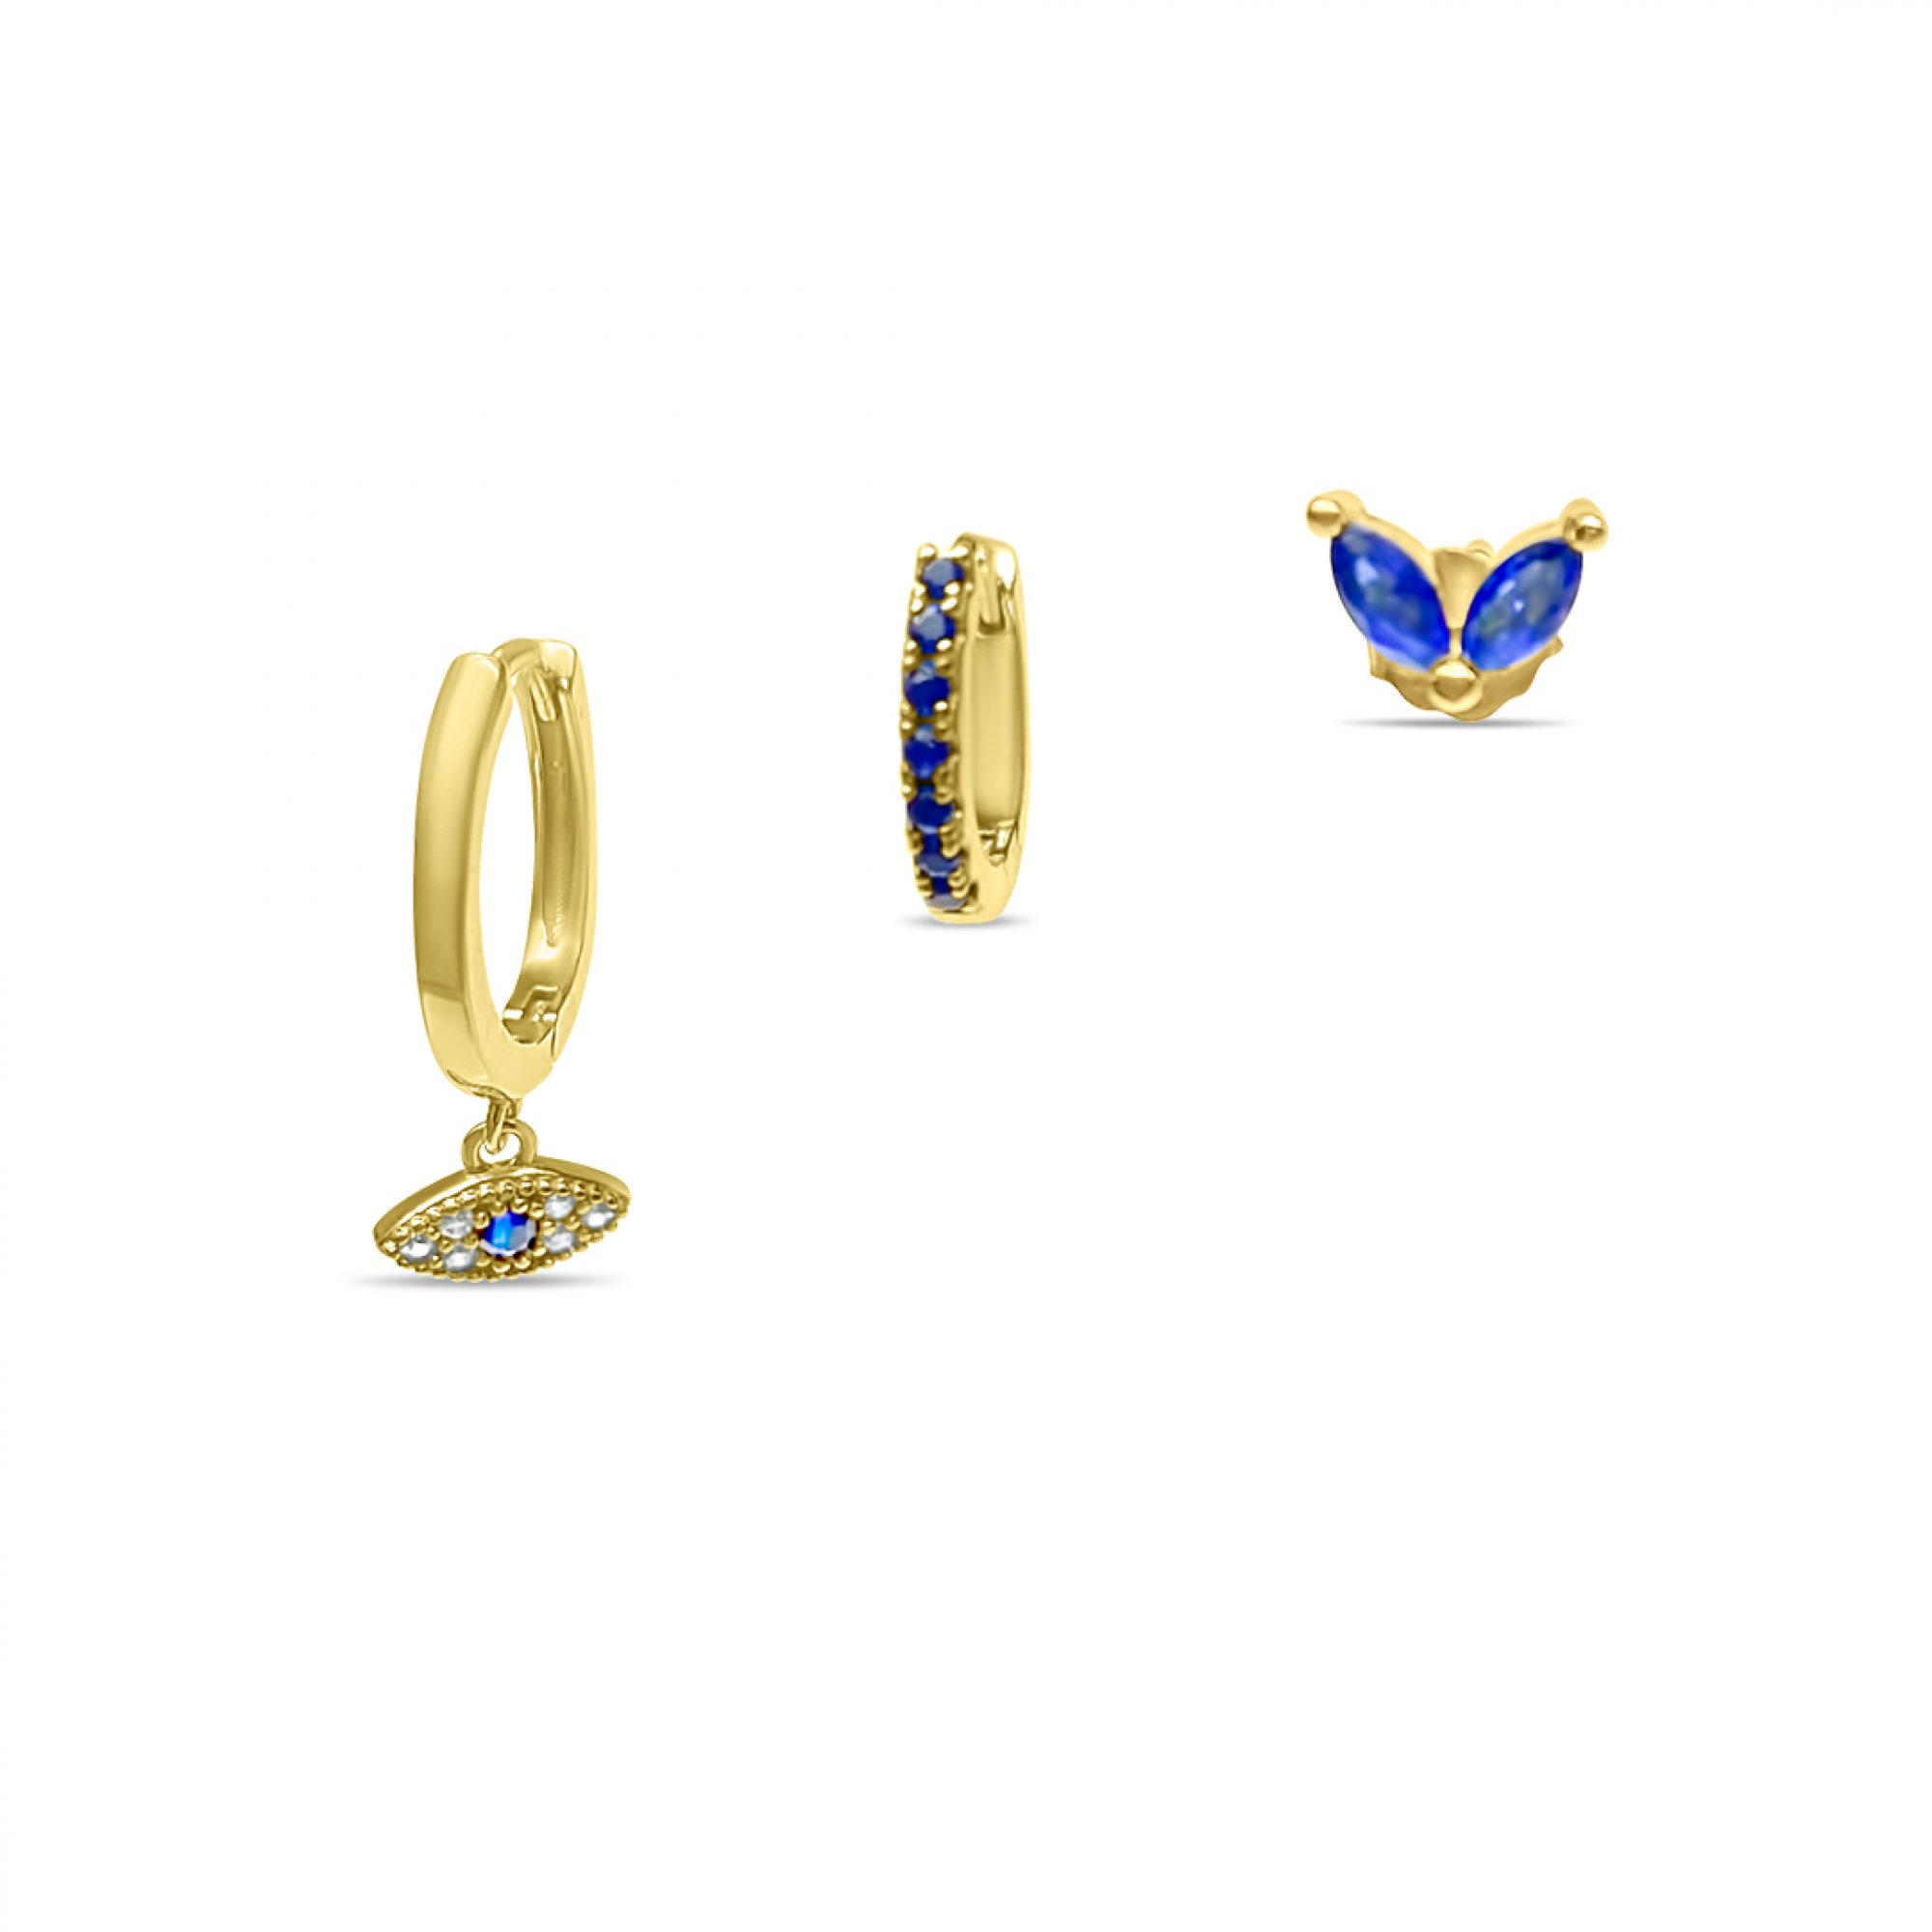 Gold plated set of earrings with zircon stones